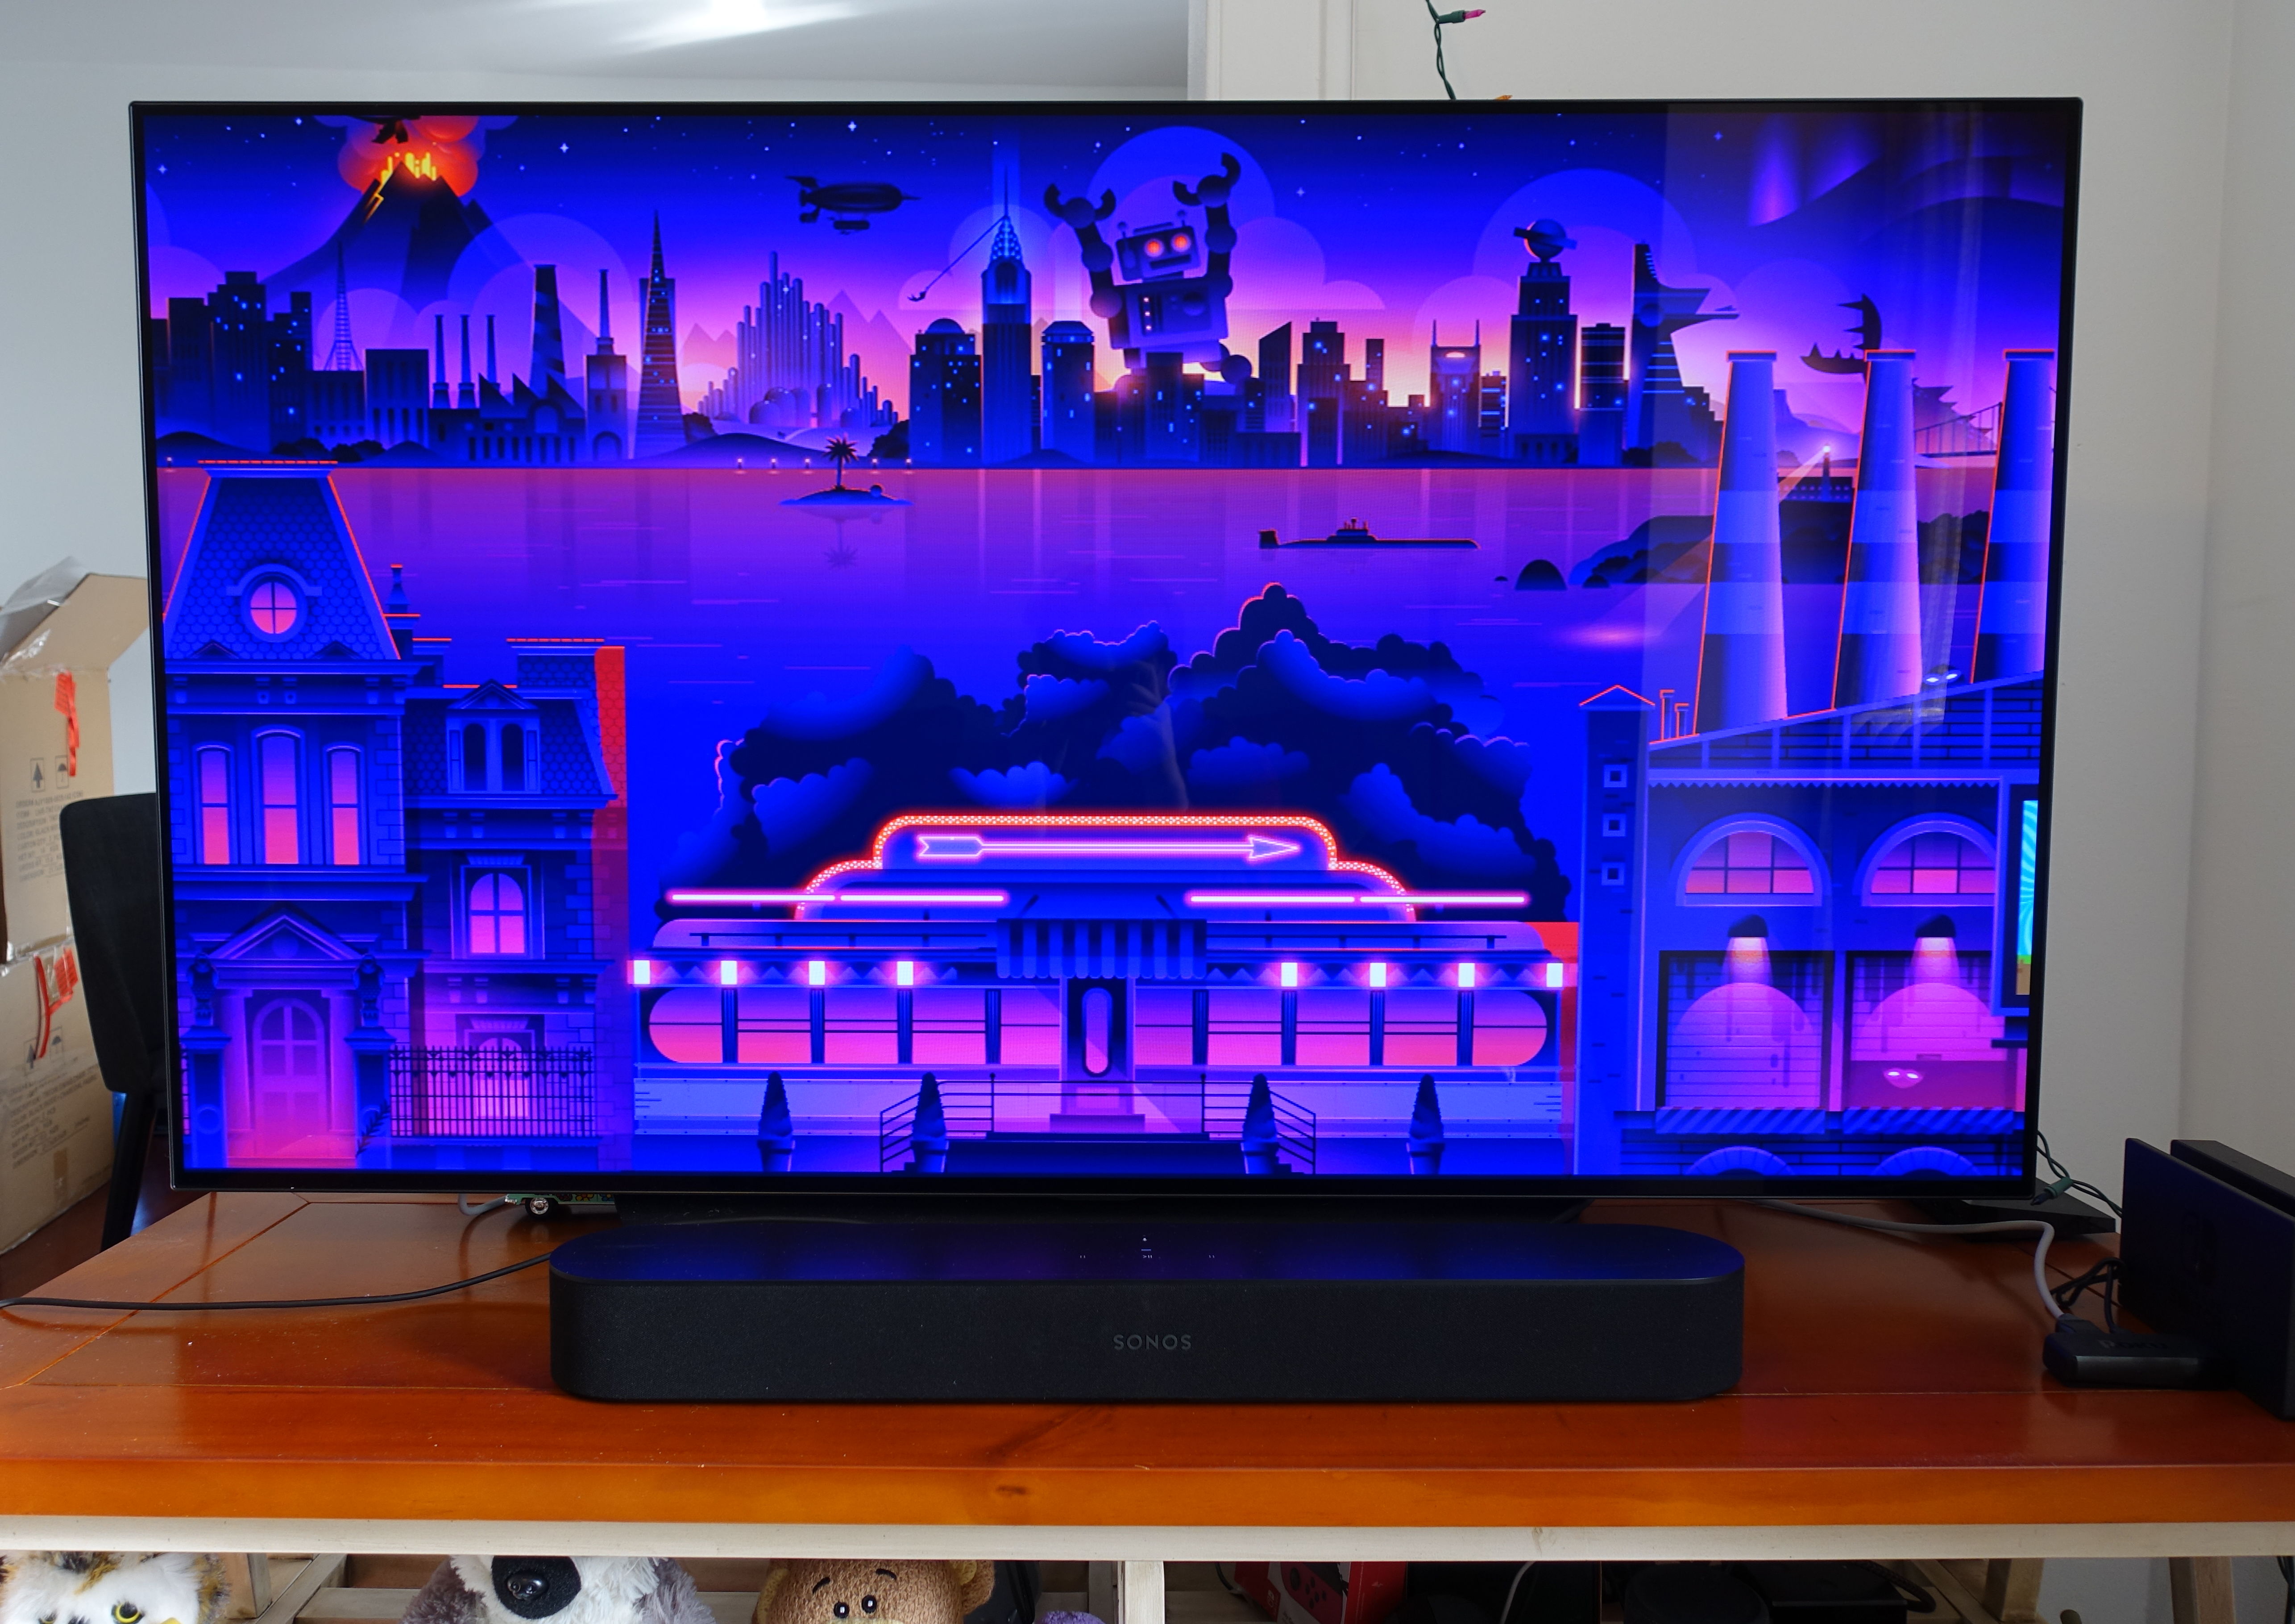 Lg Oled Tv Deal Brings B8 To New Low Price Ars Technica